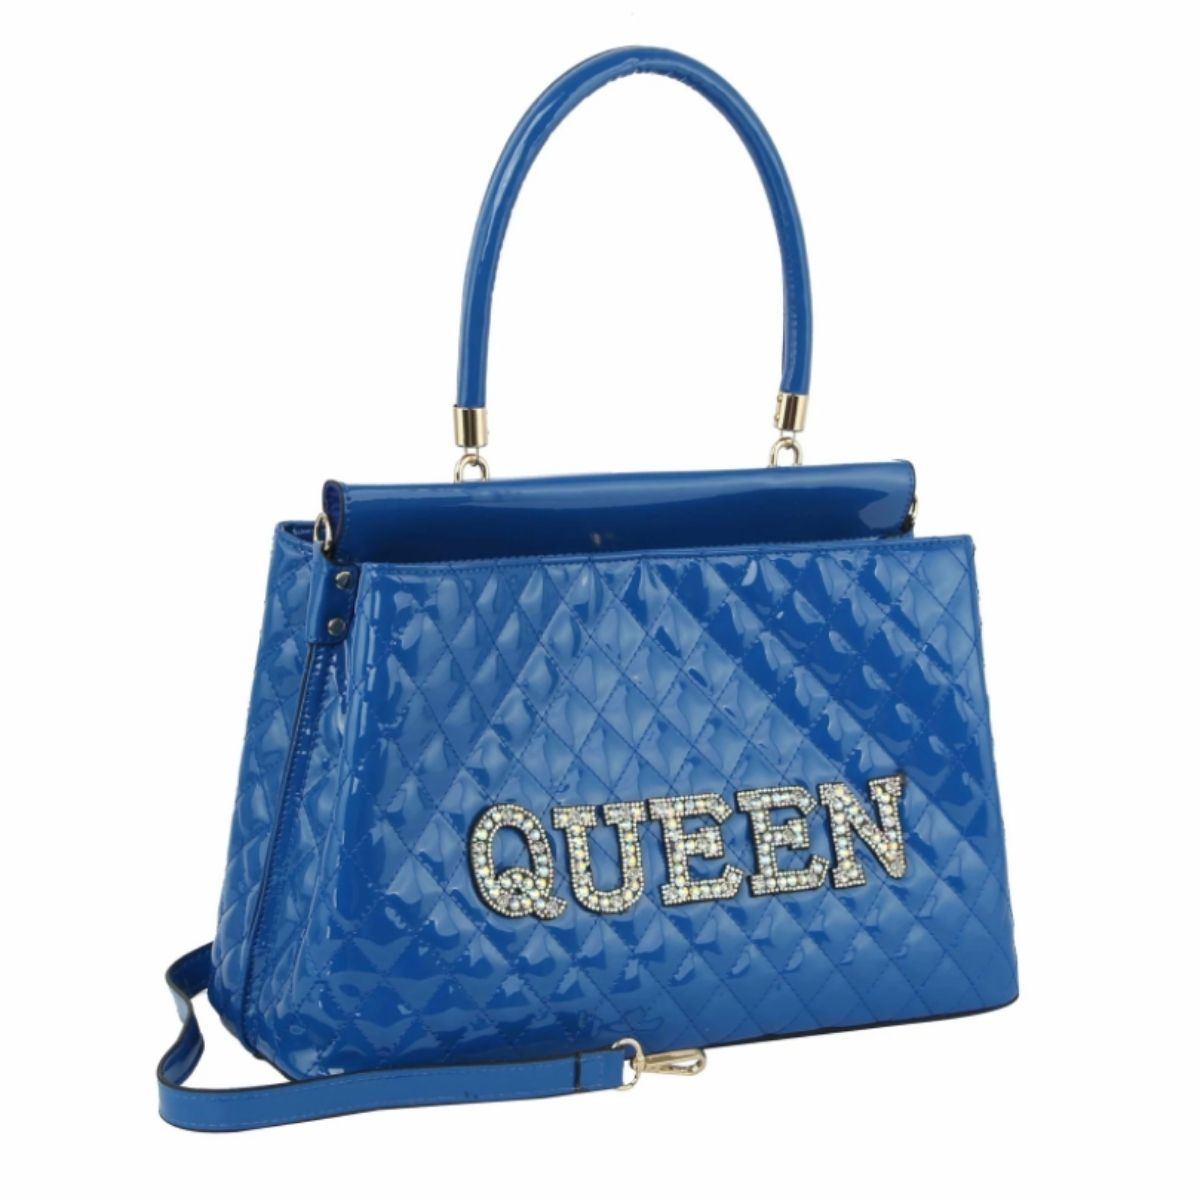 Blue Quilted Queen Tote Handbag